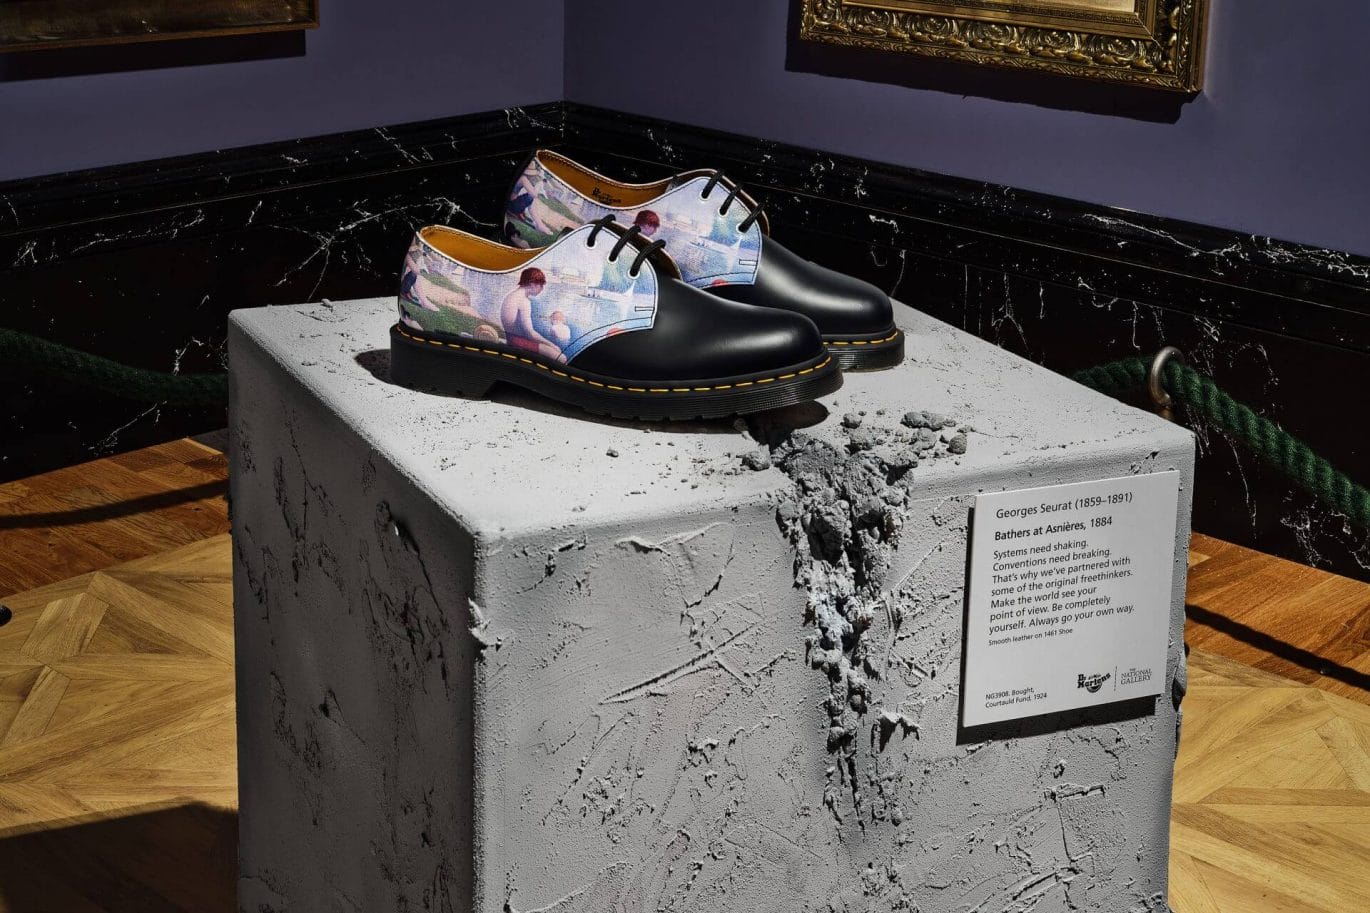 Dr. Martens x National Gallery